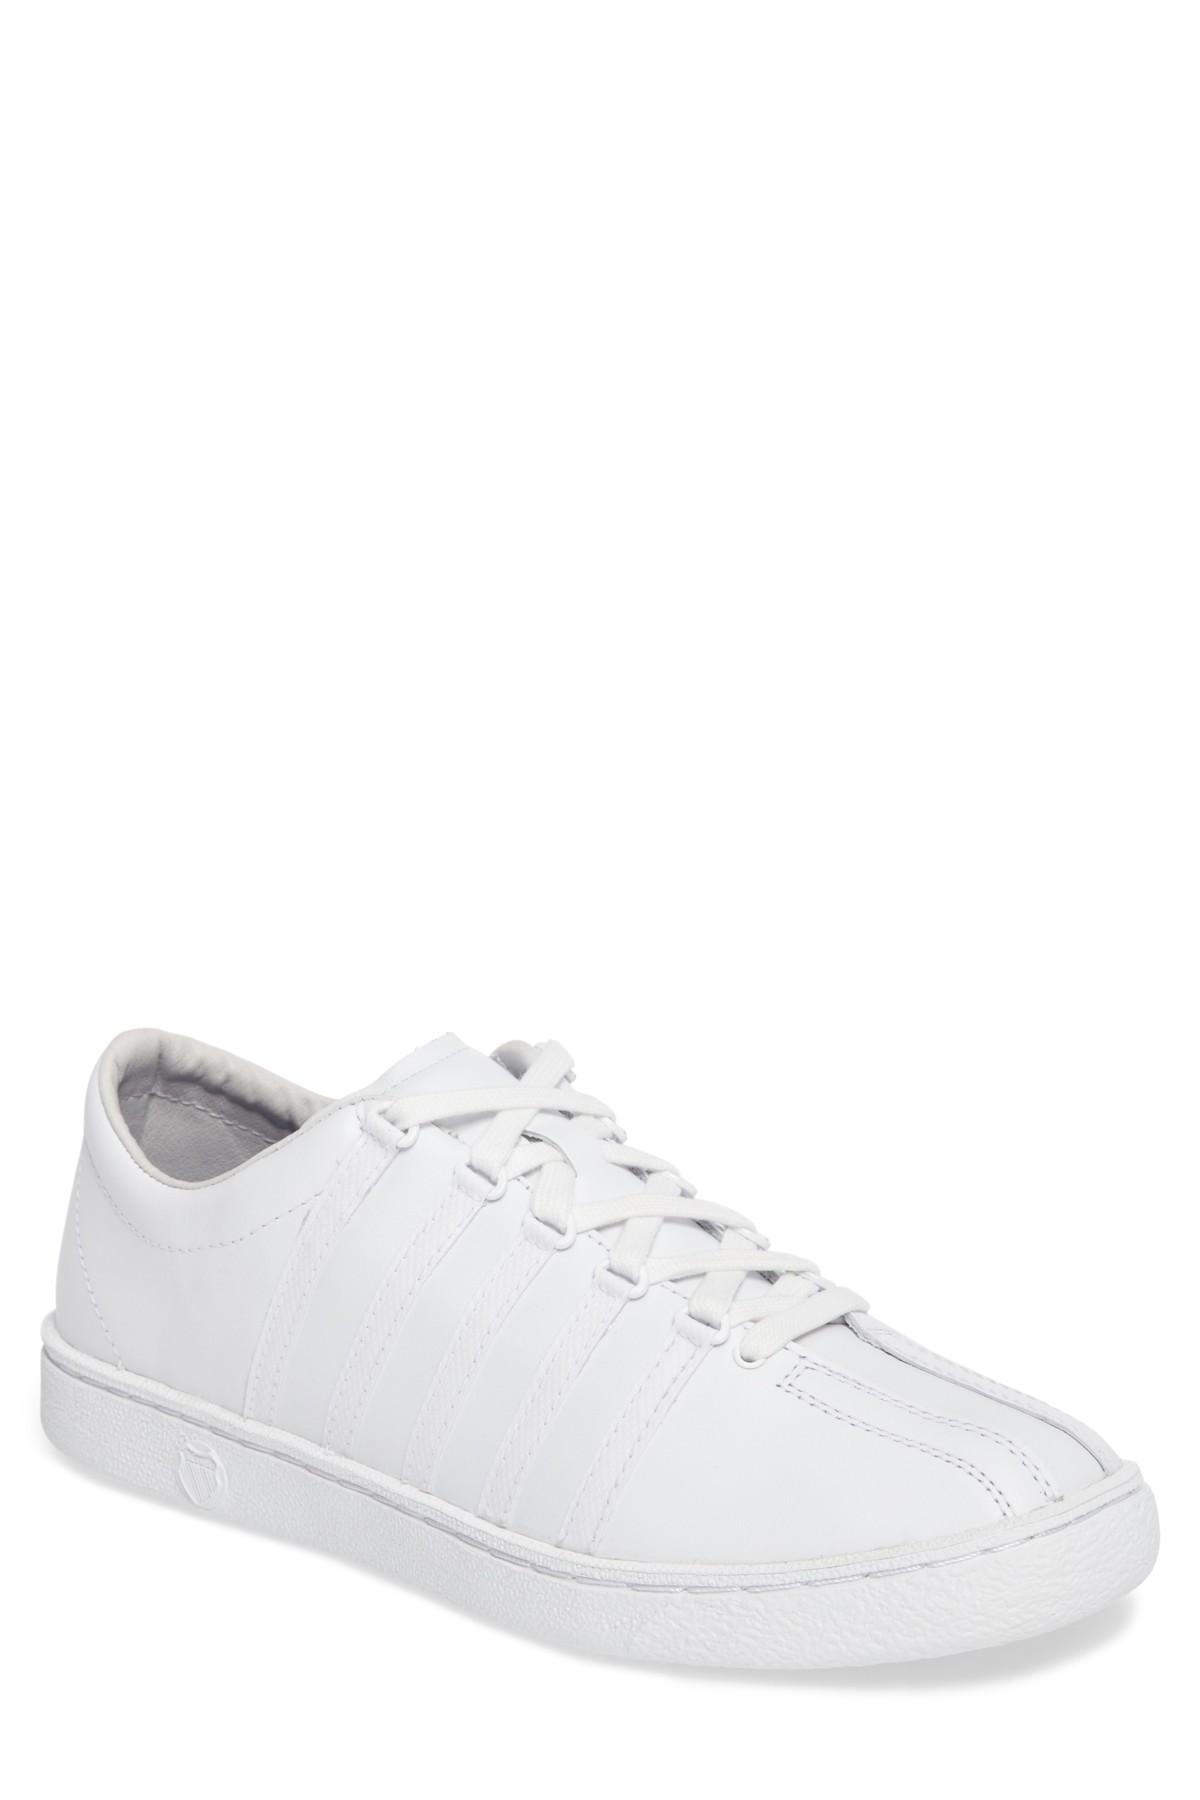 K-swiss Classic '66 in for | Lyst